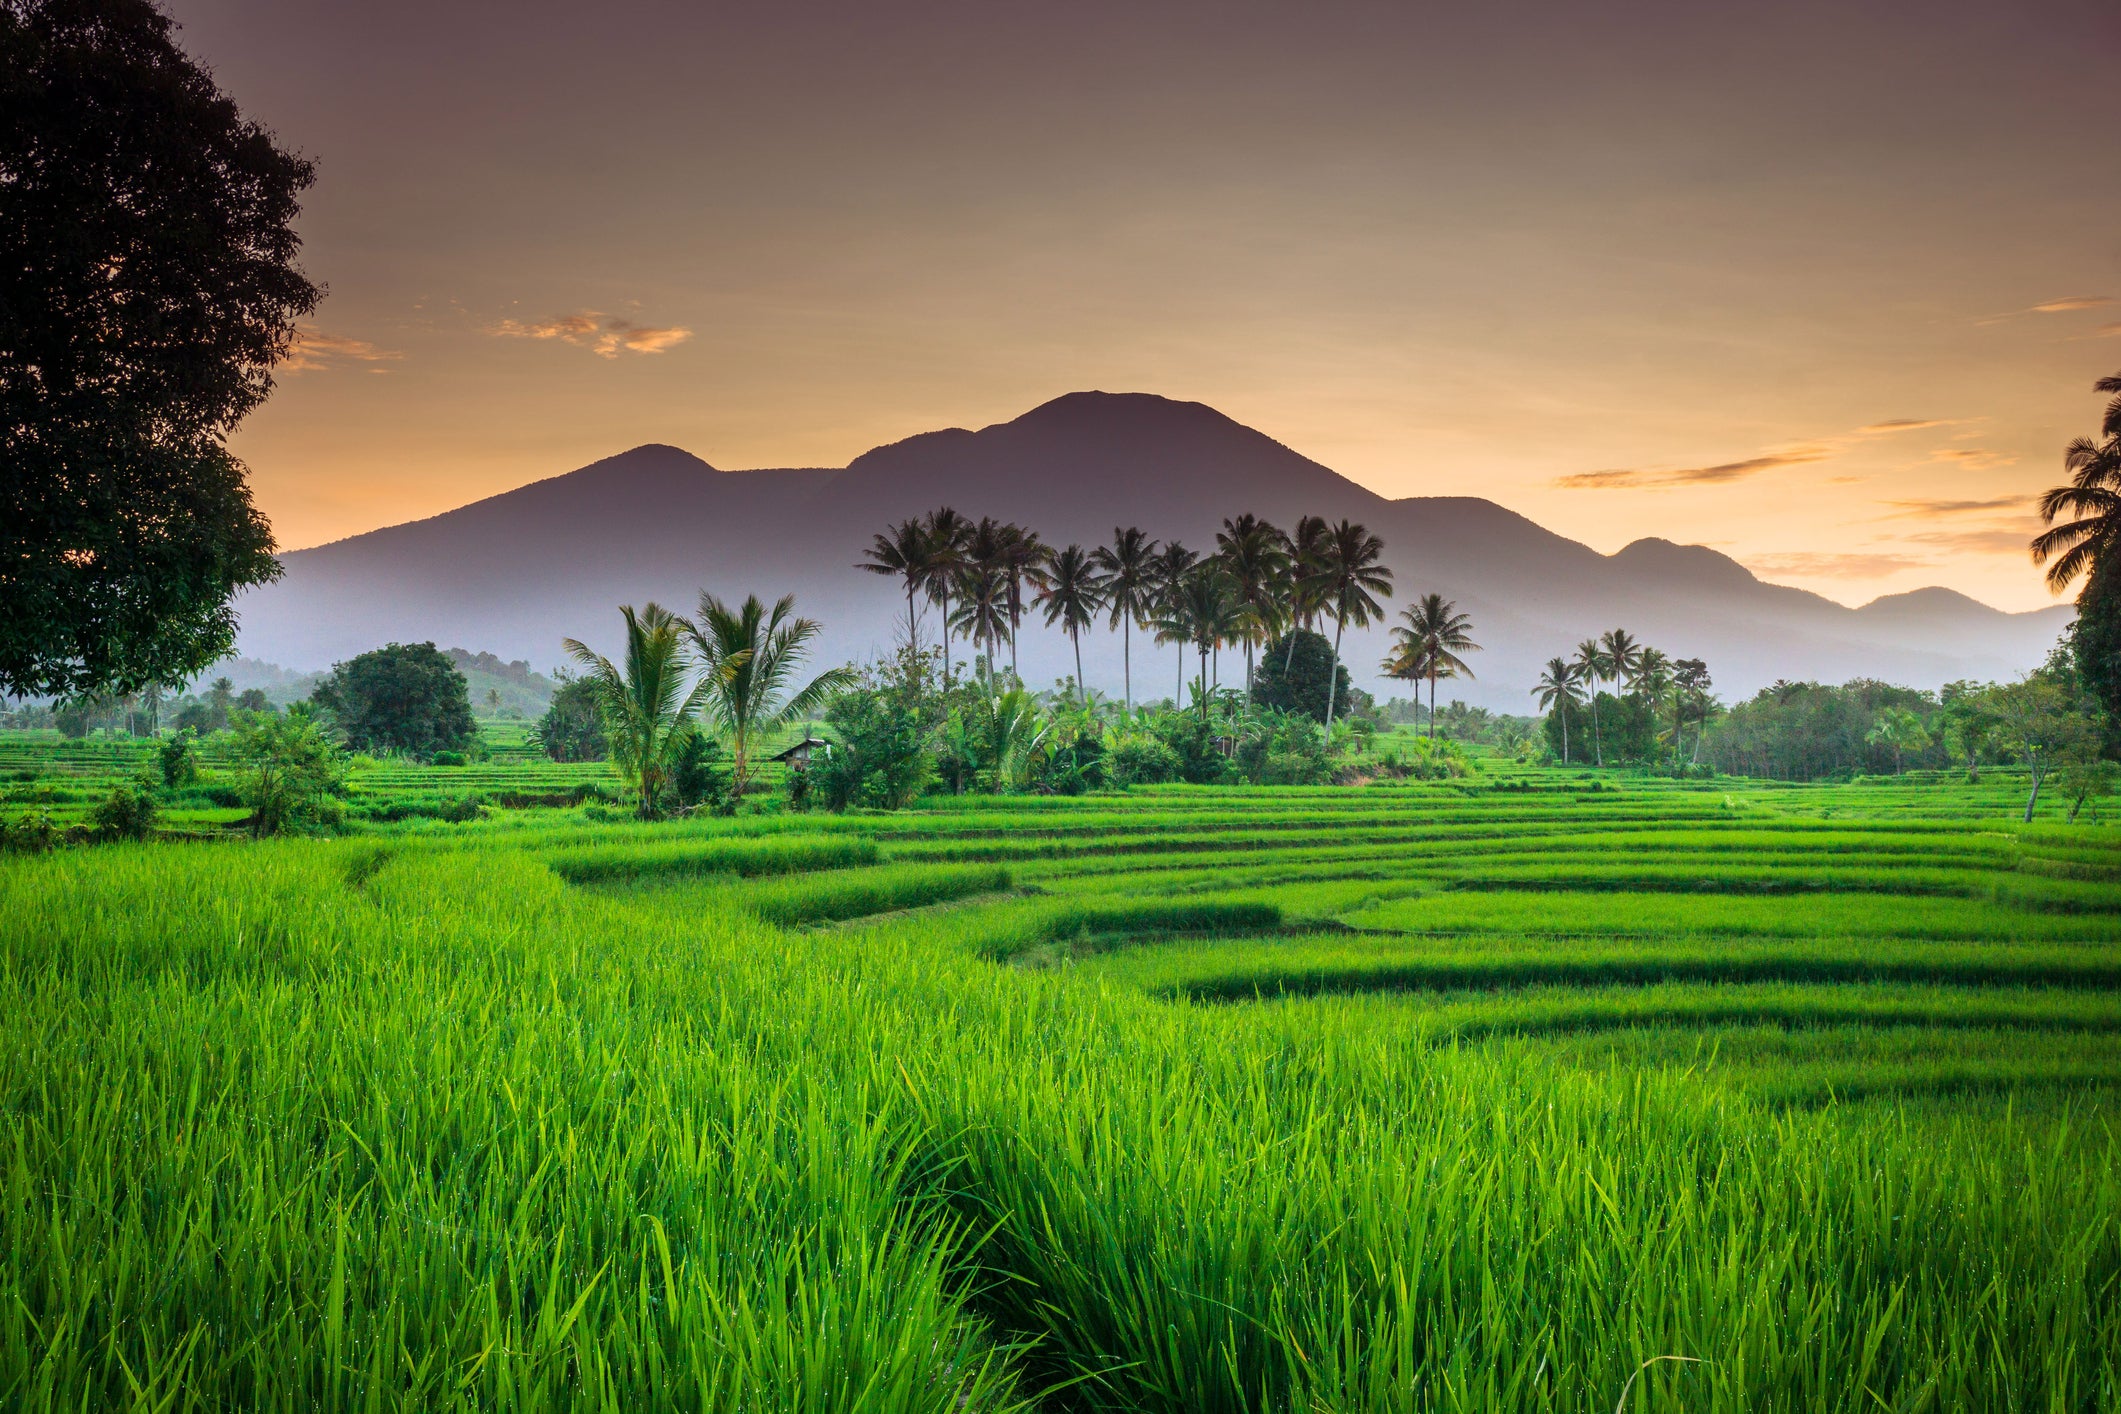 The ban applies to 22 mountains in Bali